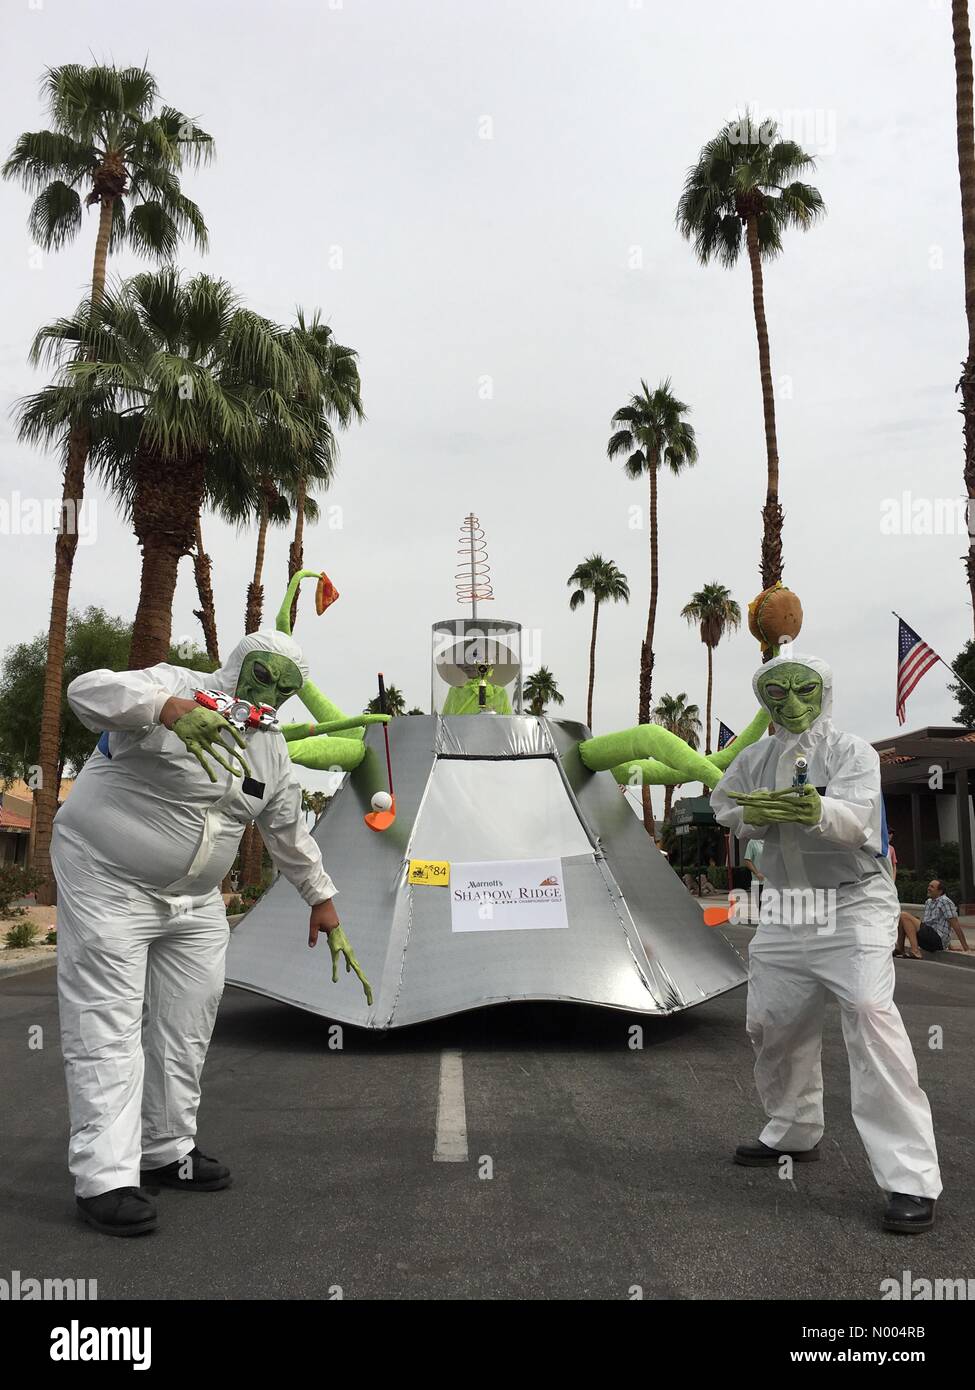 Palm Desert, California USA October 25, 2015 The 51st Annual Palm Desert Golf Cart Parade. This year's theme is Area 51: Palm Desert is Out of this World. Credit: Lisa Werner/Stockimo News/Alamy Stock Photo